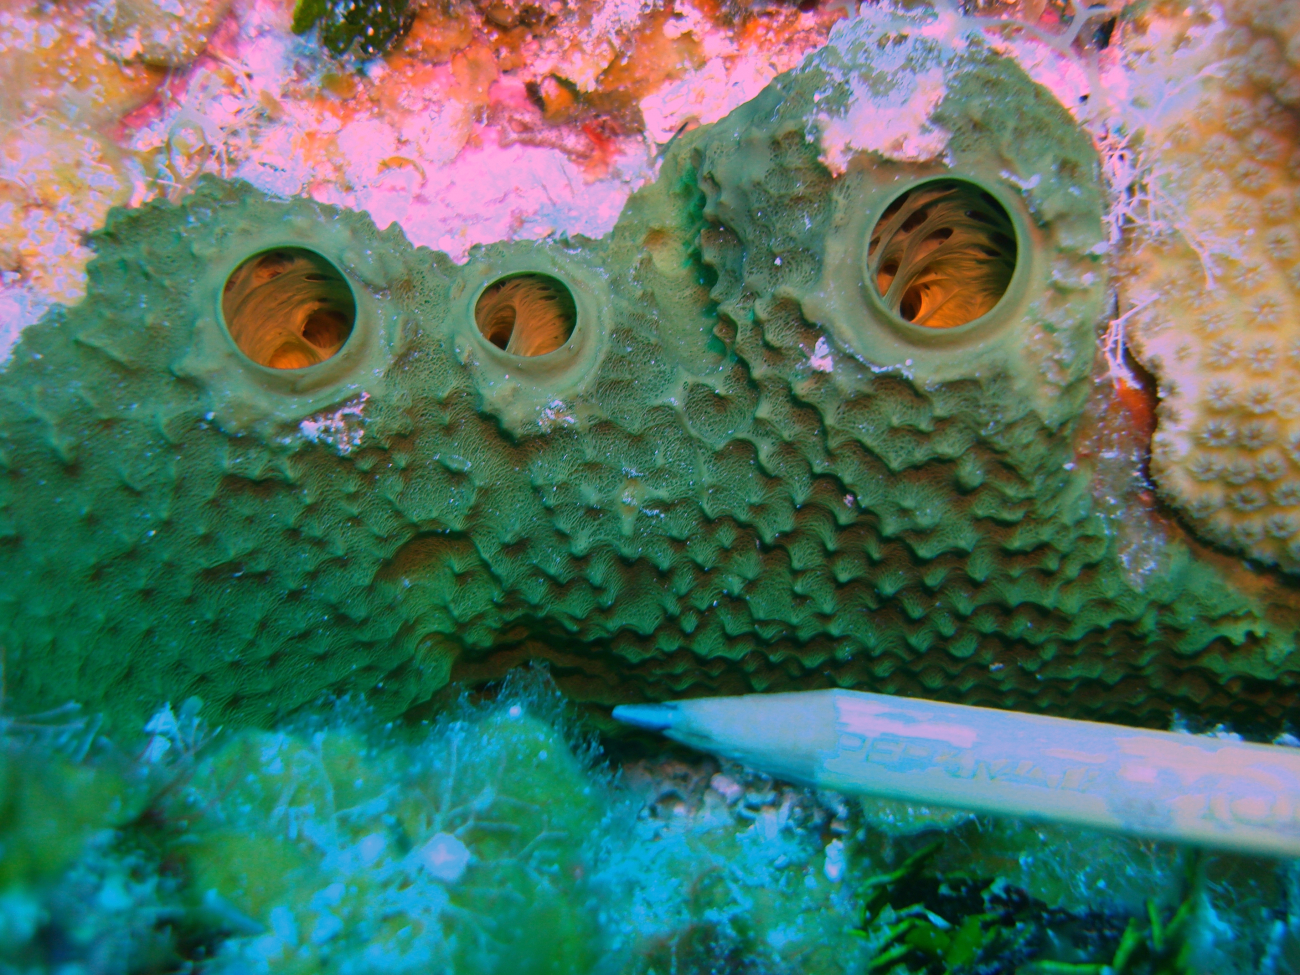 Brown sponge with relatively large osculums